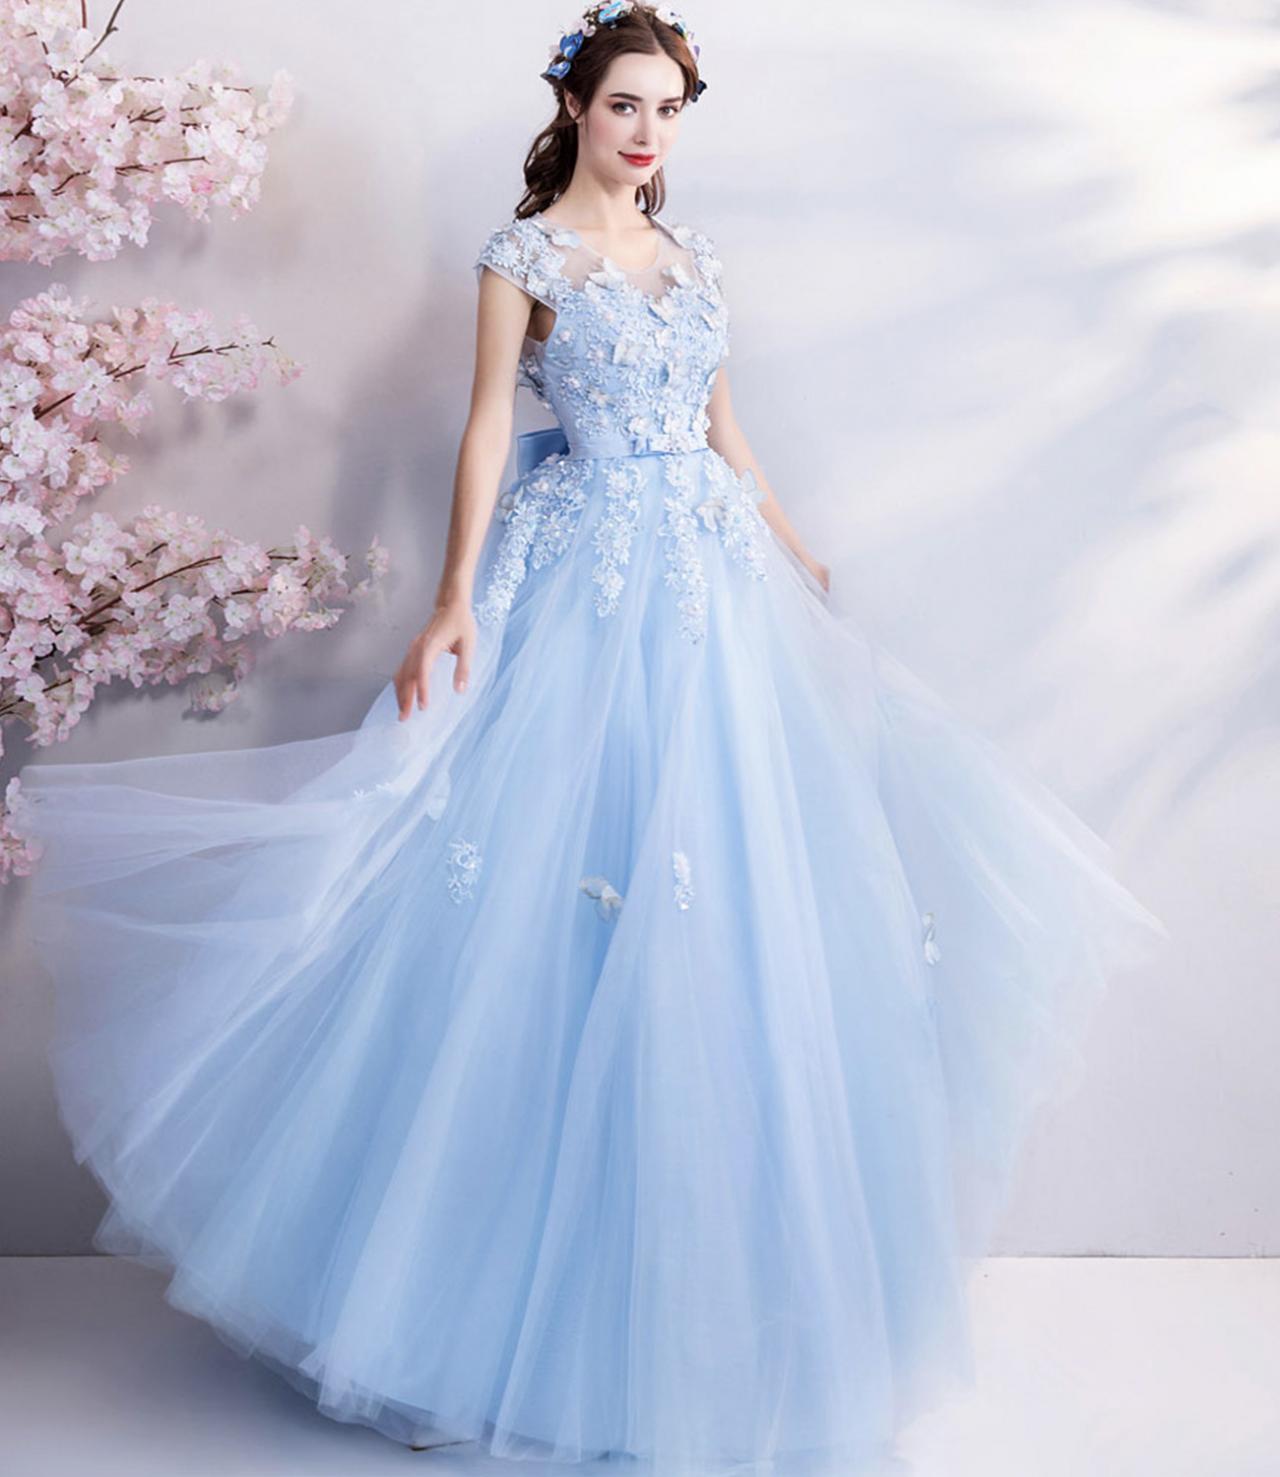 Blue Tulle Lace Long A Line Prom Dress Evening Dress